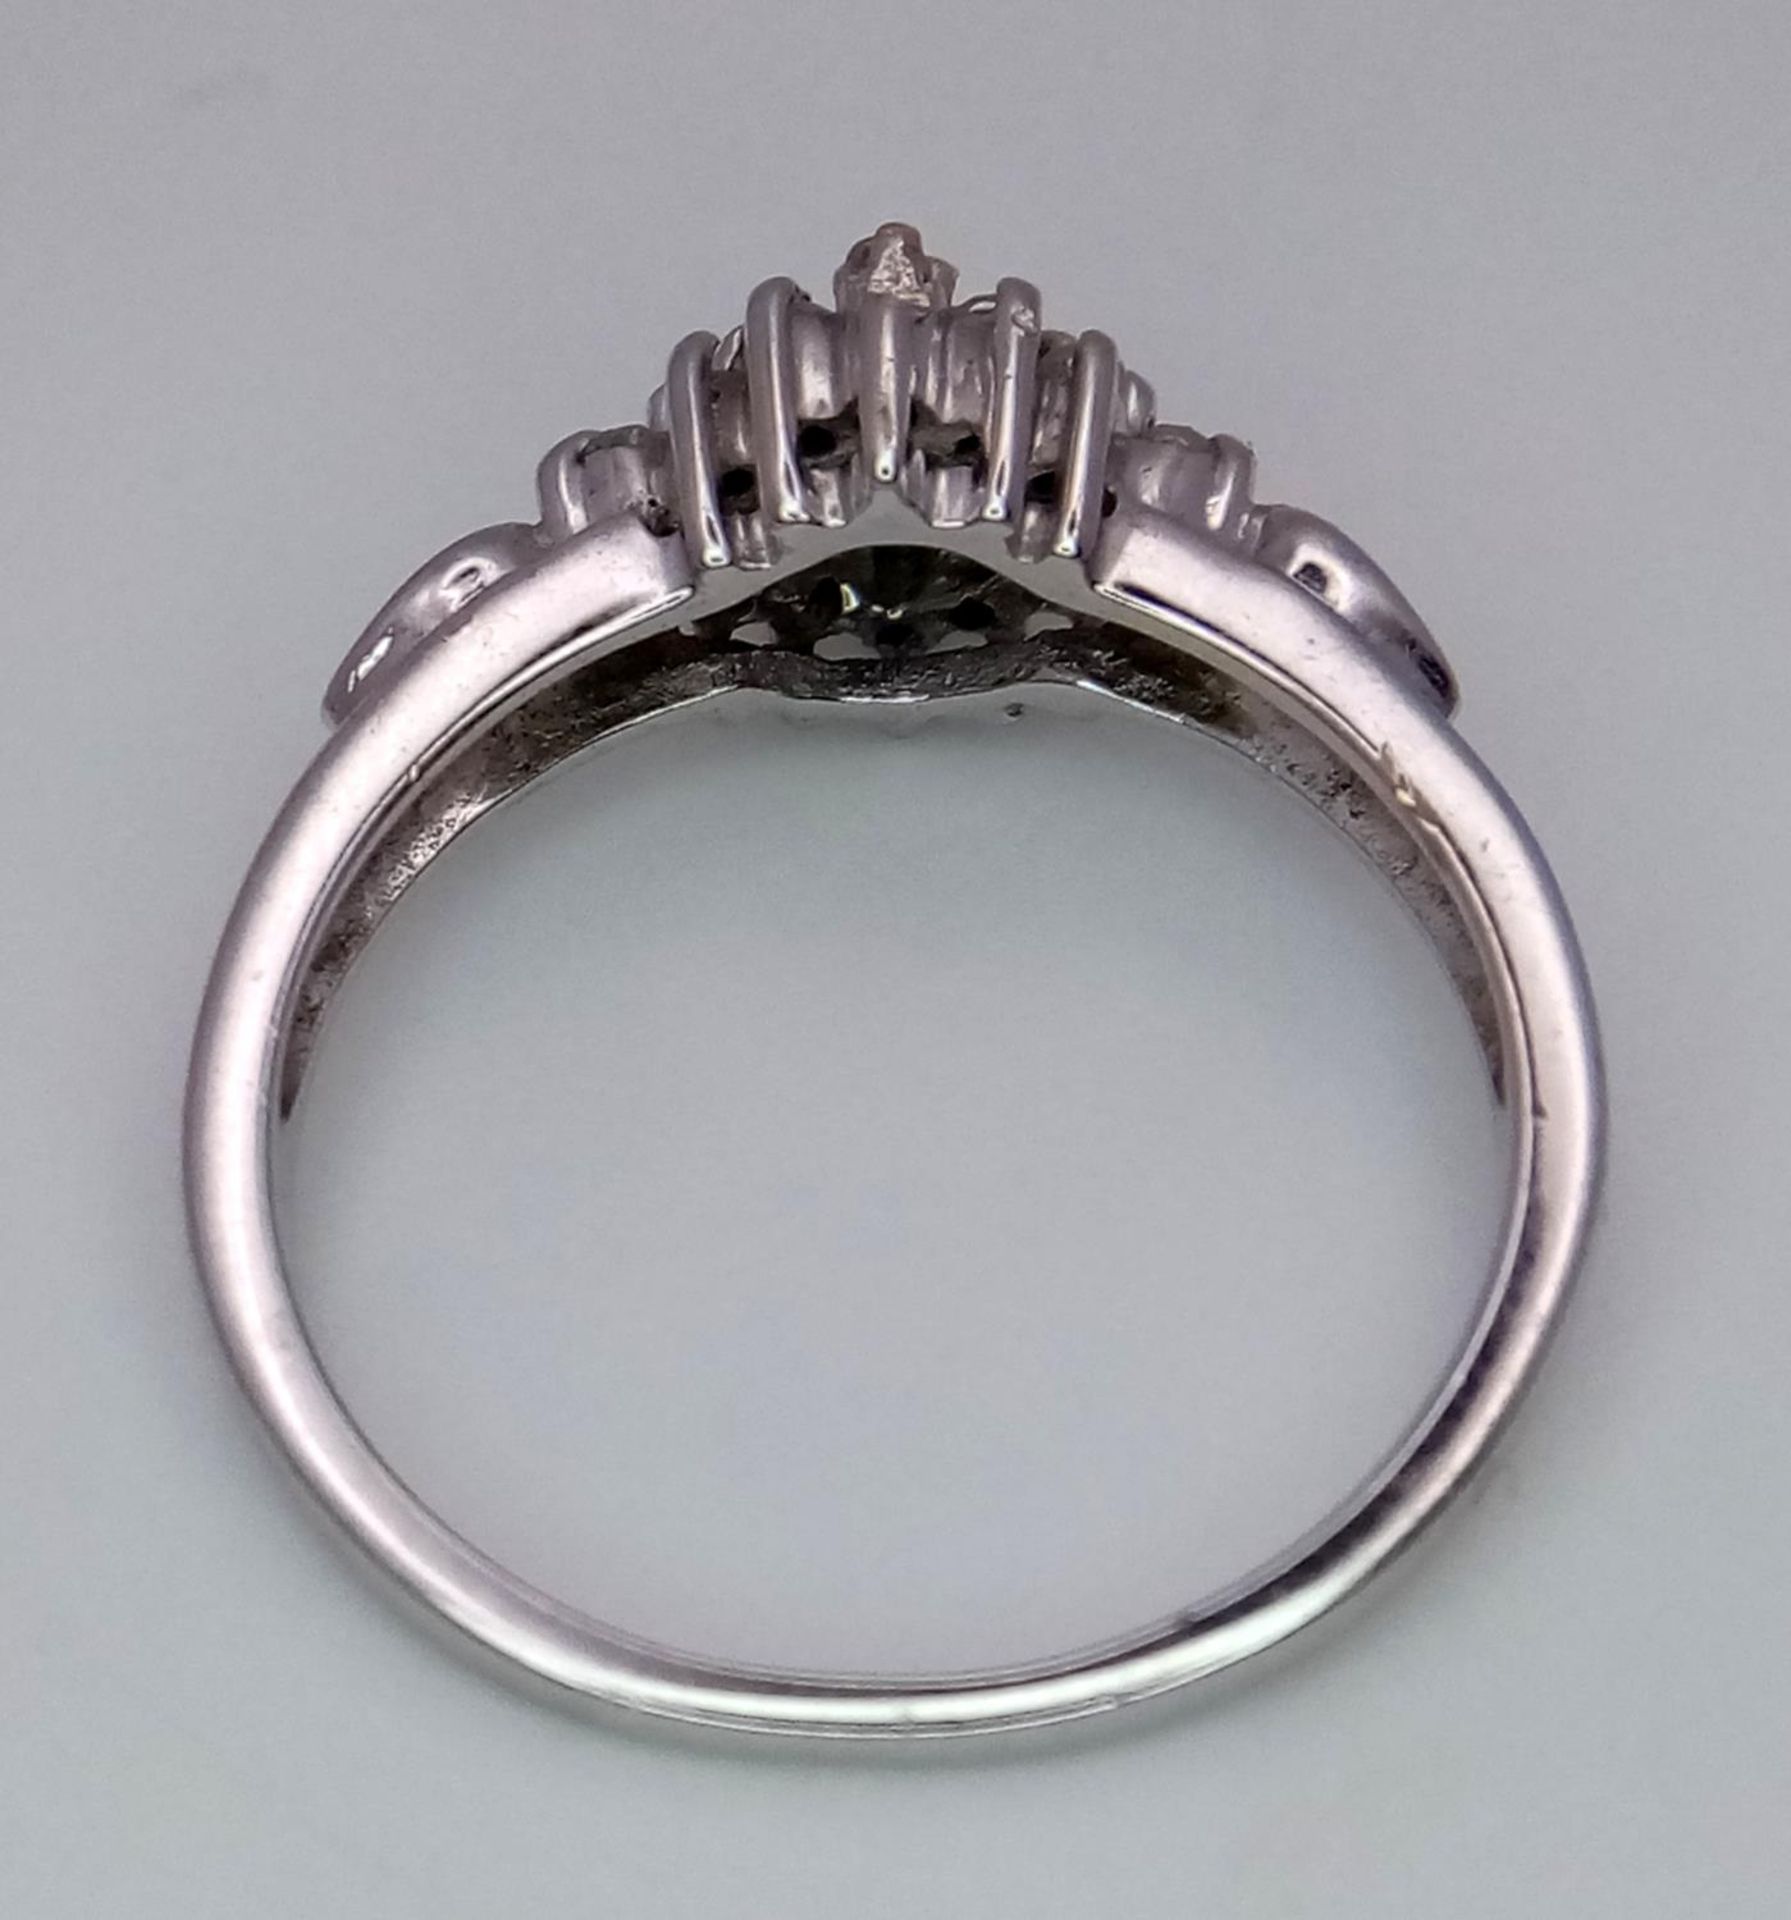 A 9K WHITE GOLD DIAMOND CLUSTER RING. 0.25ctw, size M, 2.7g total weight. Ref: SC 9026 - Image 4 of 5